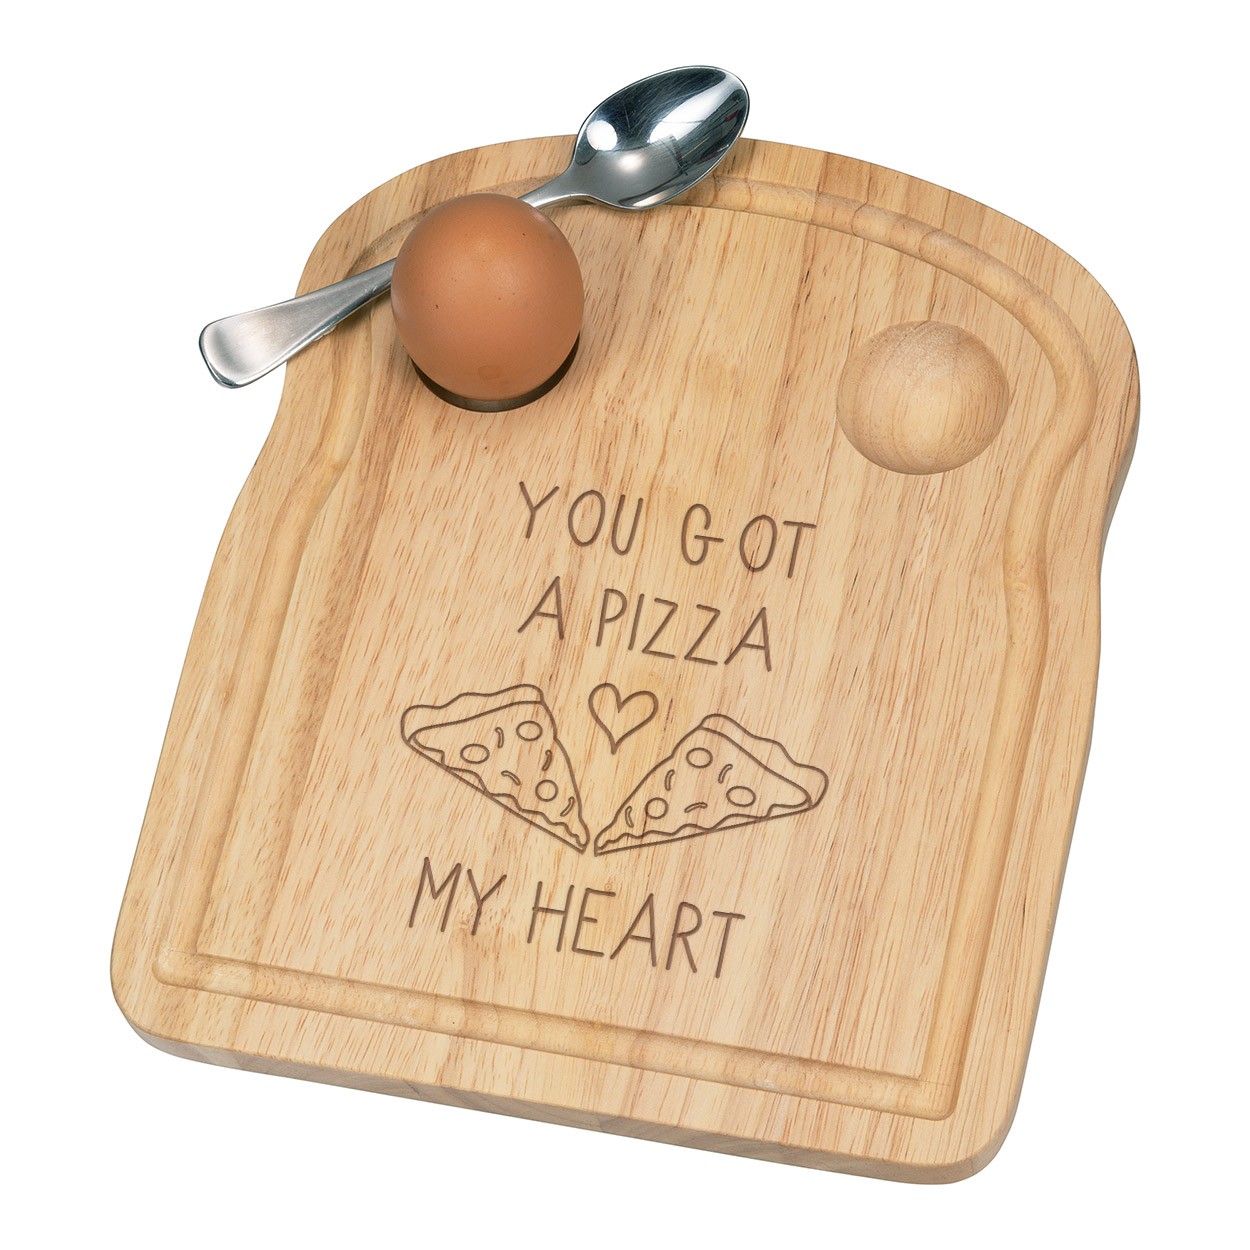 You Got A Pizza My Heart Breakfast Dippy Egg Cup Board Wooden